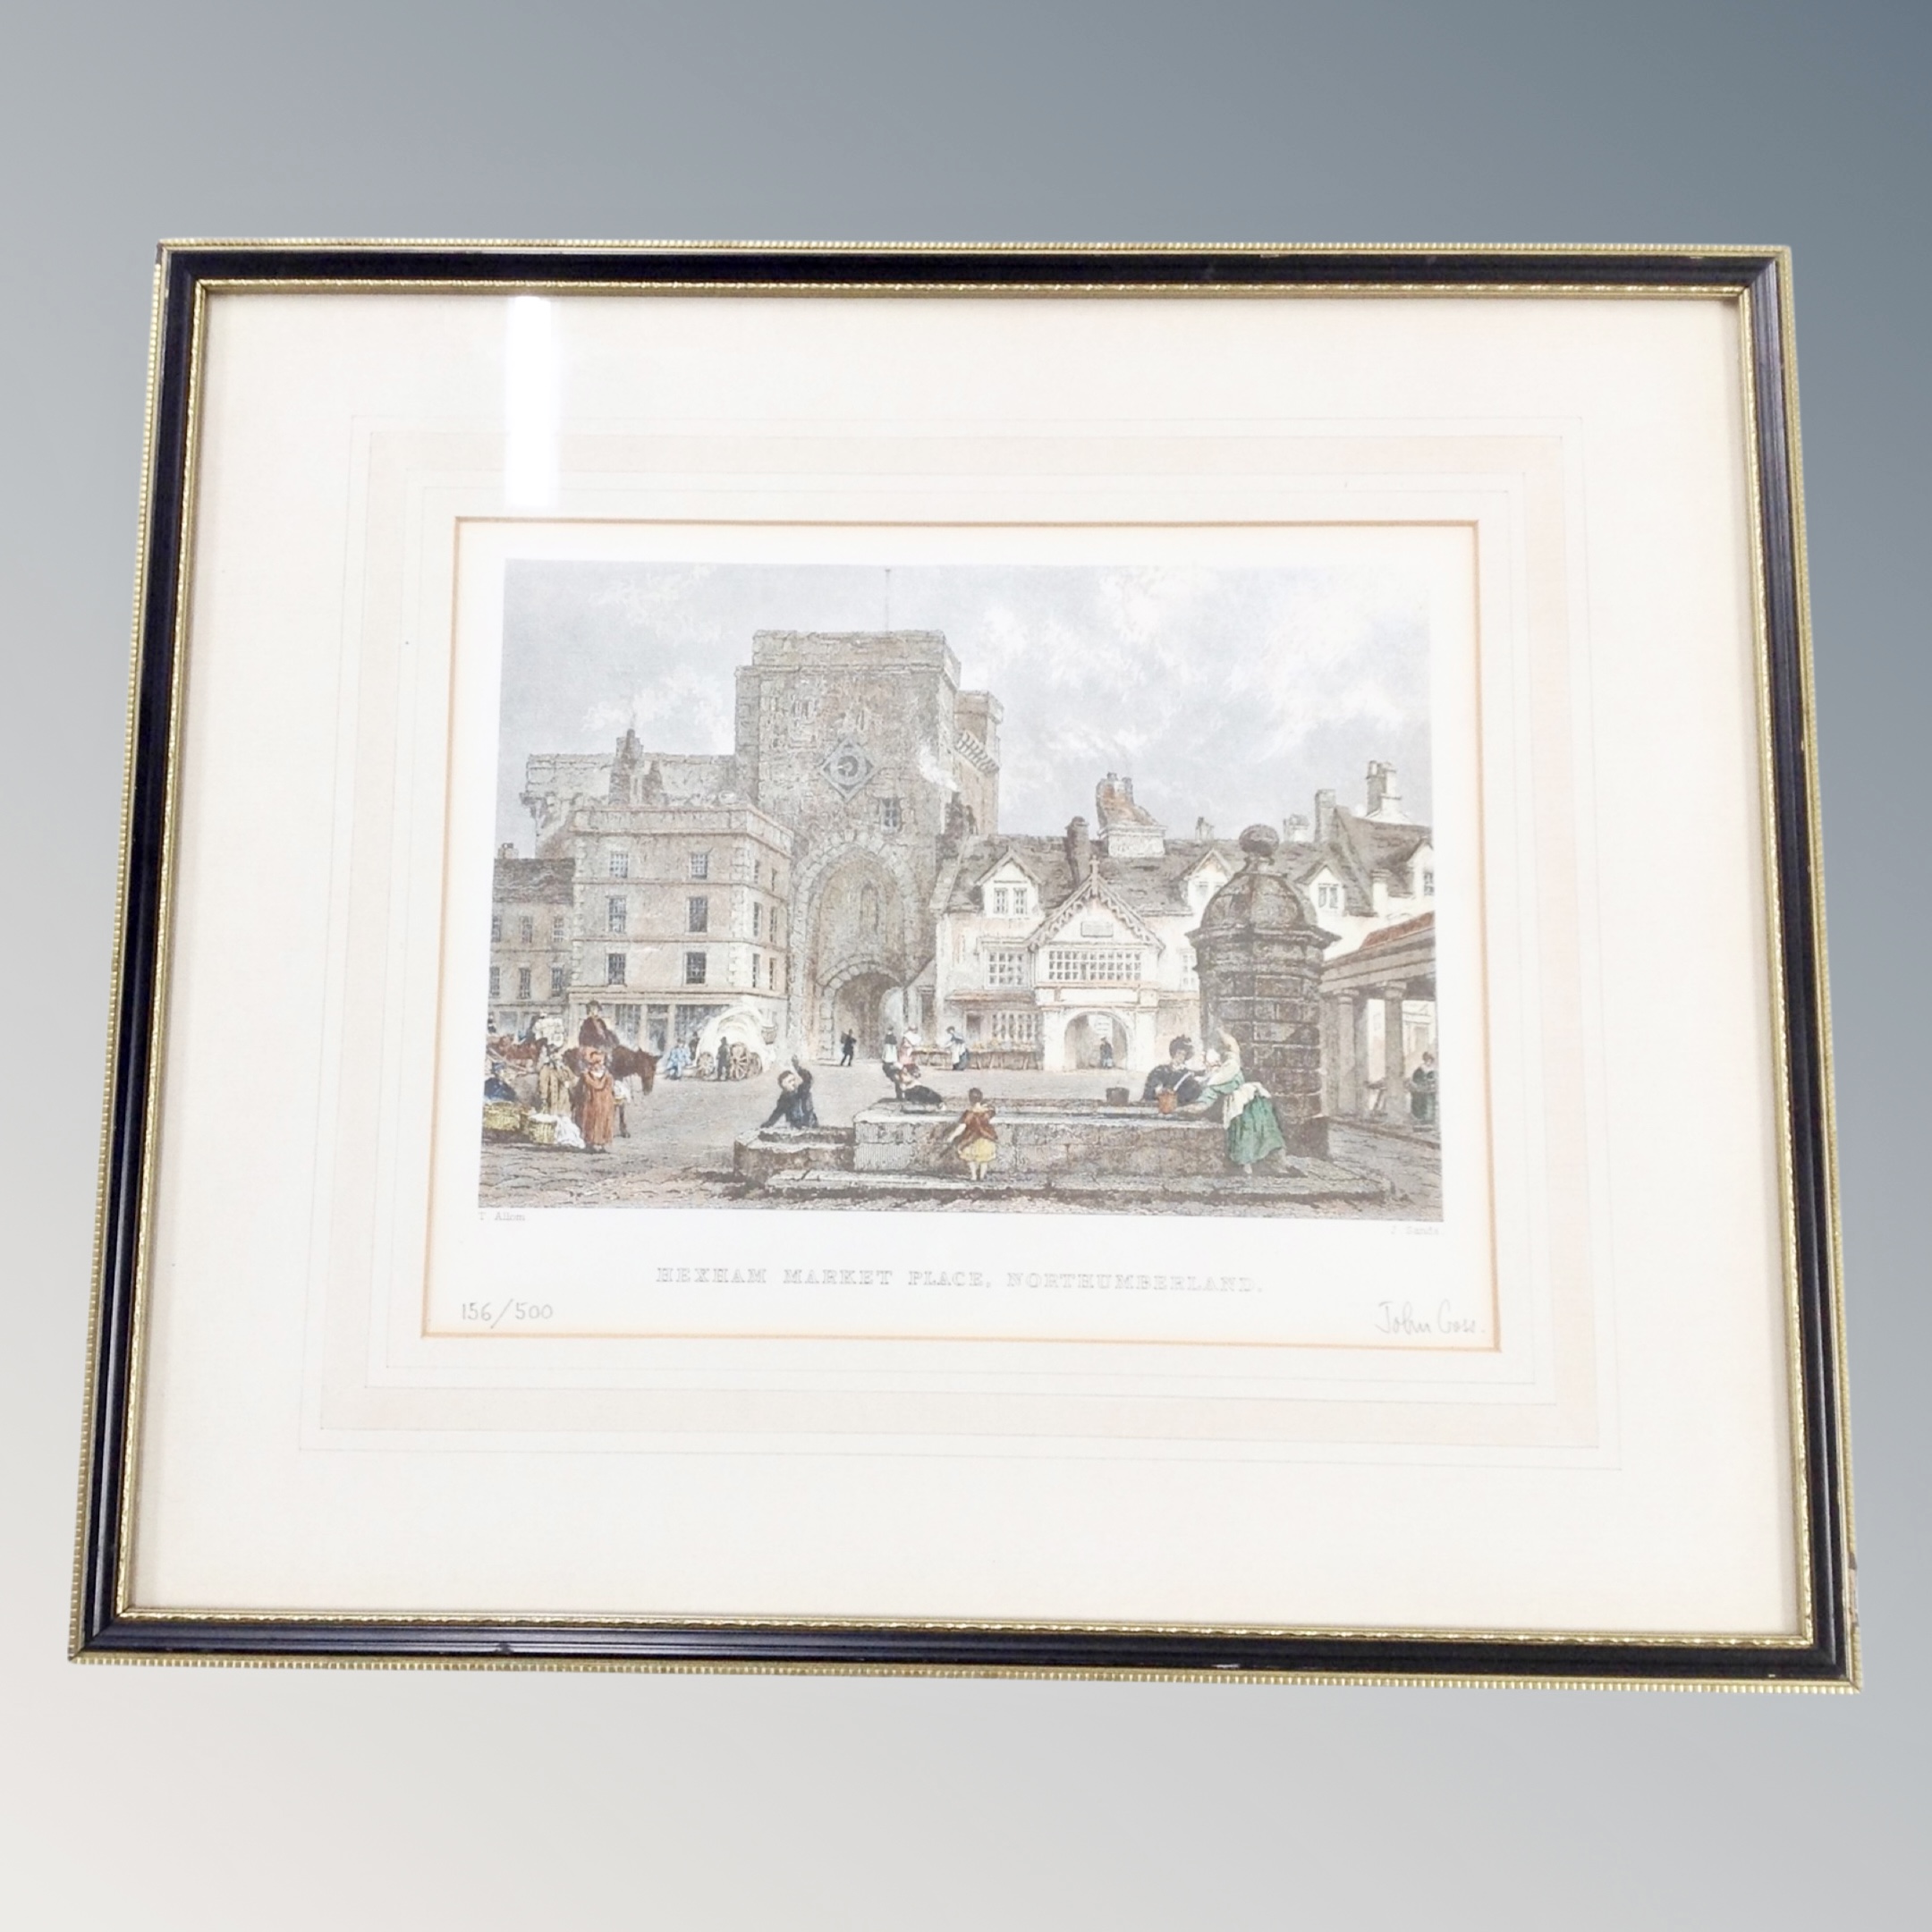 A John Gross signed limited edition hand coloured engraving - Hexham Market Place no.